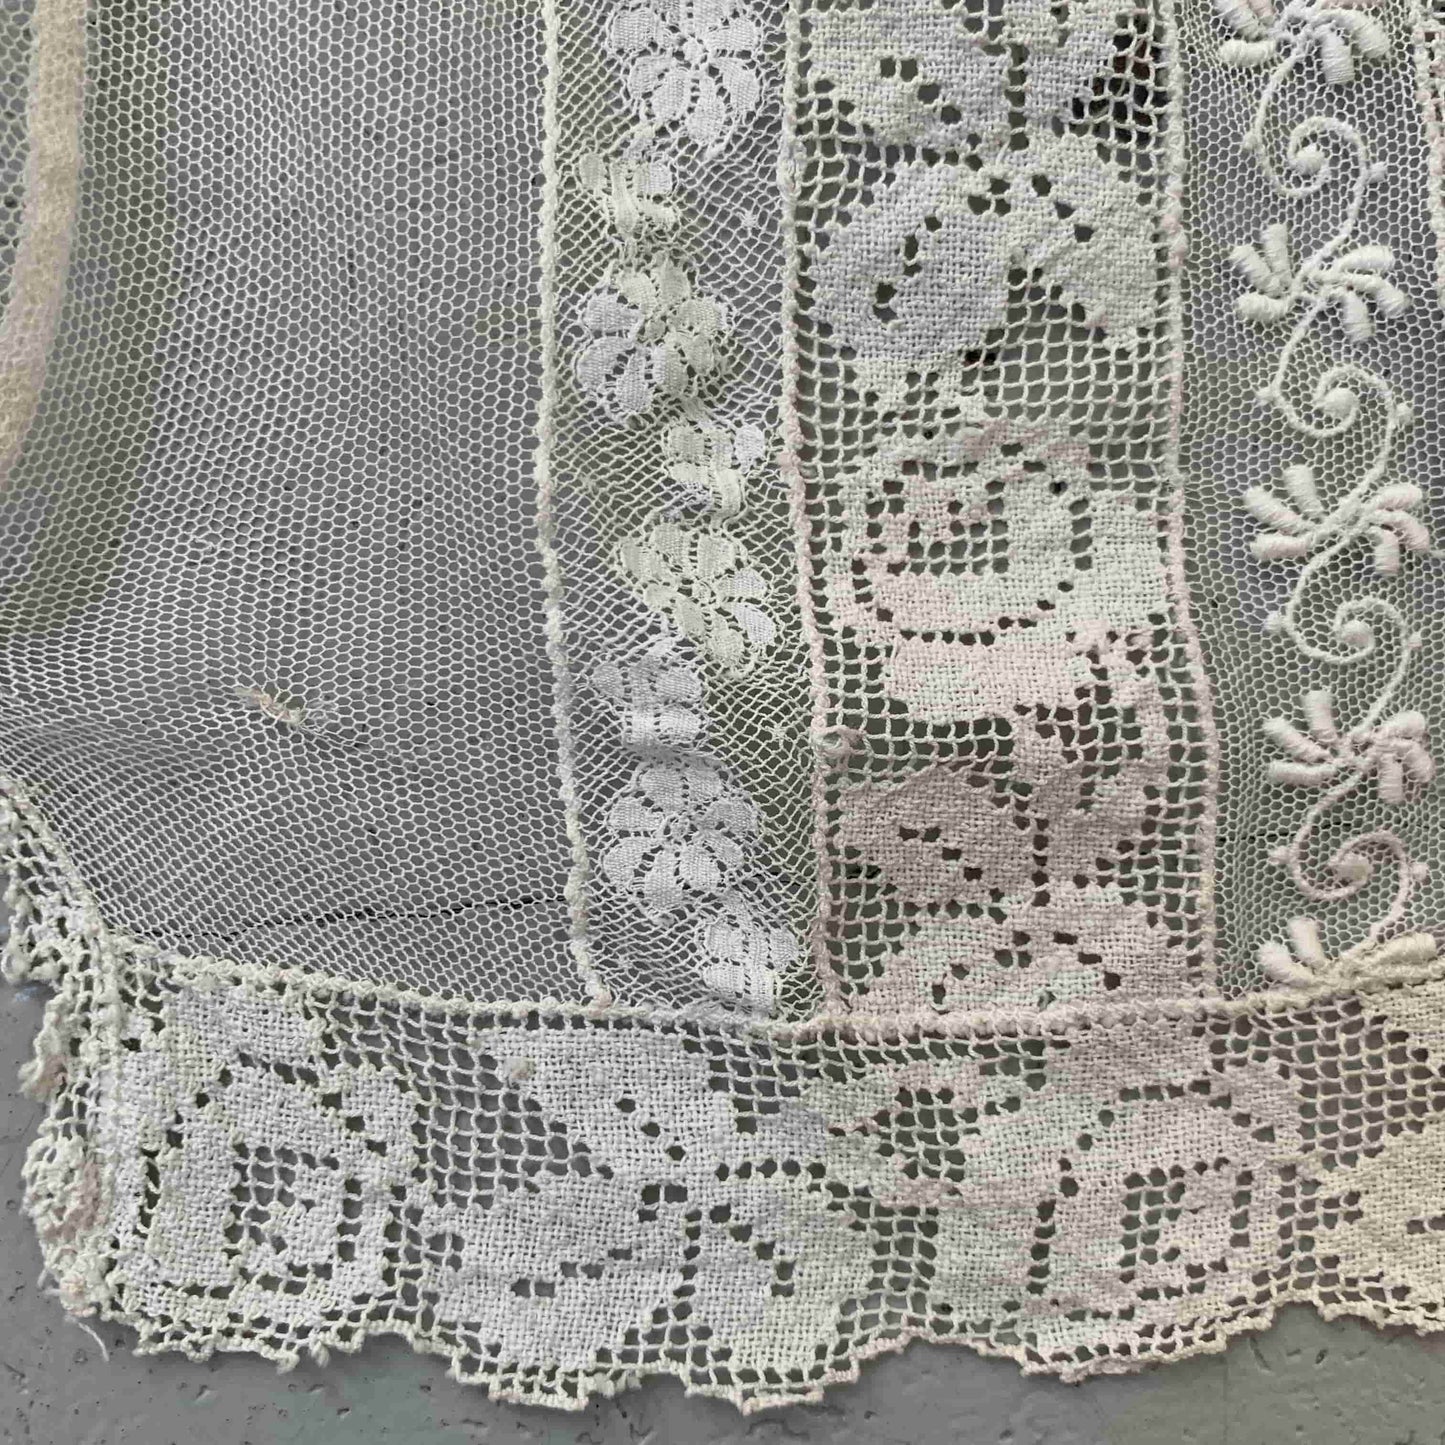 close up detail of the floral filet lace